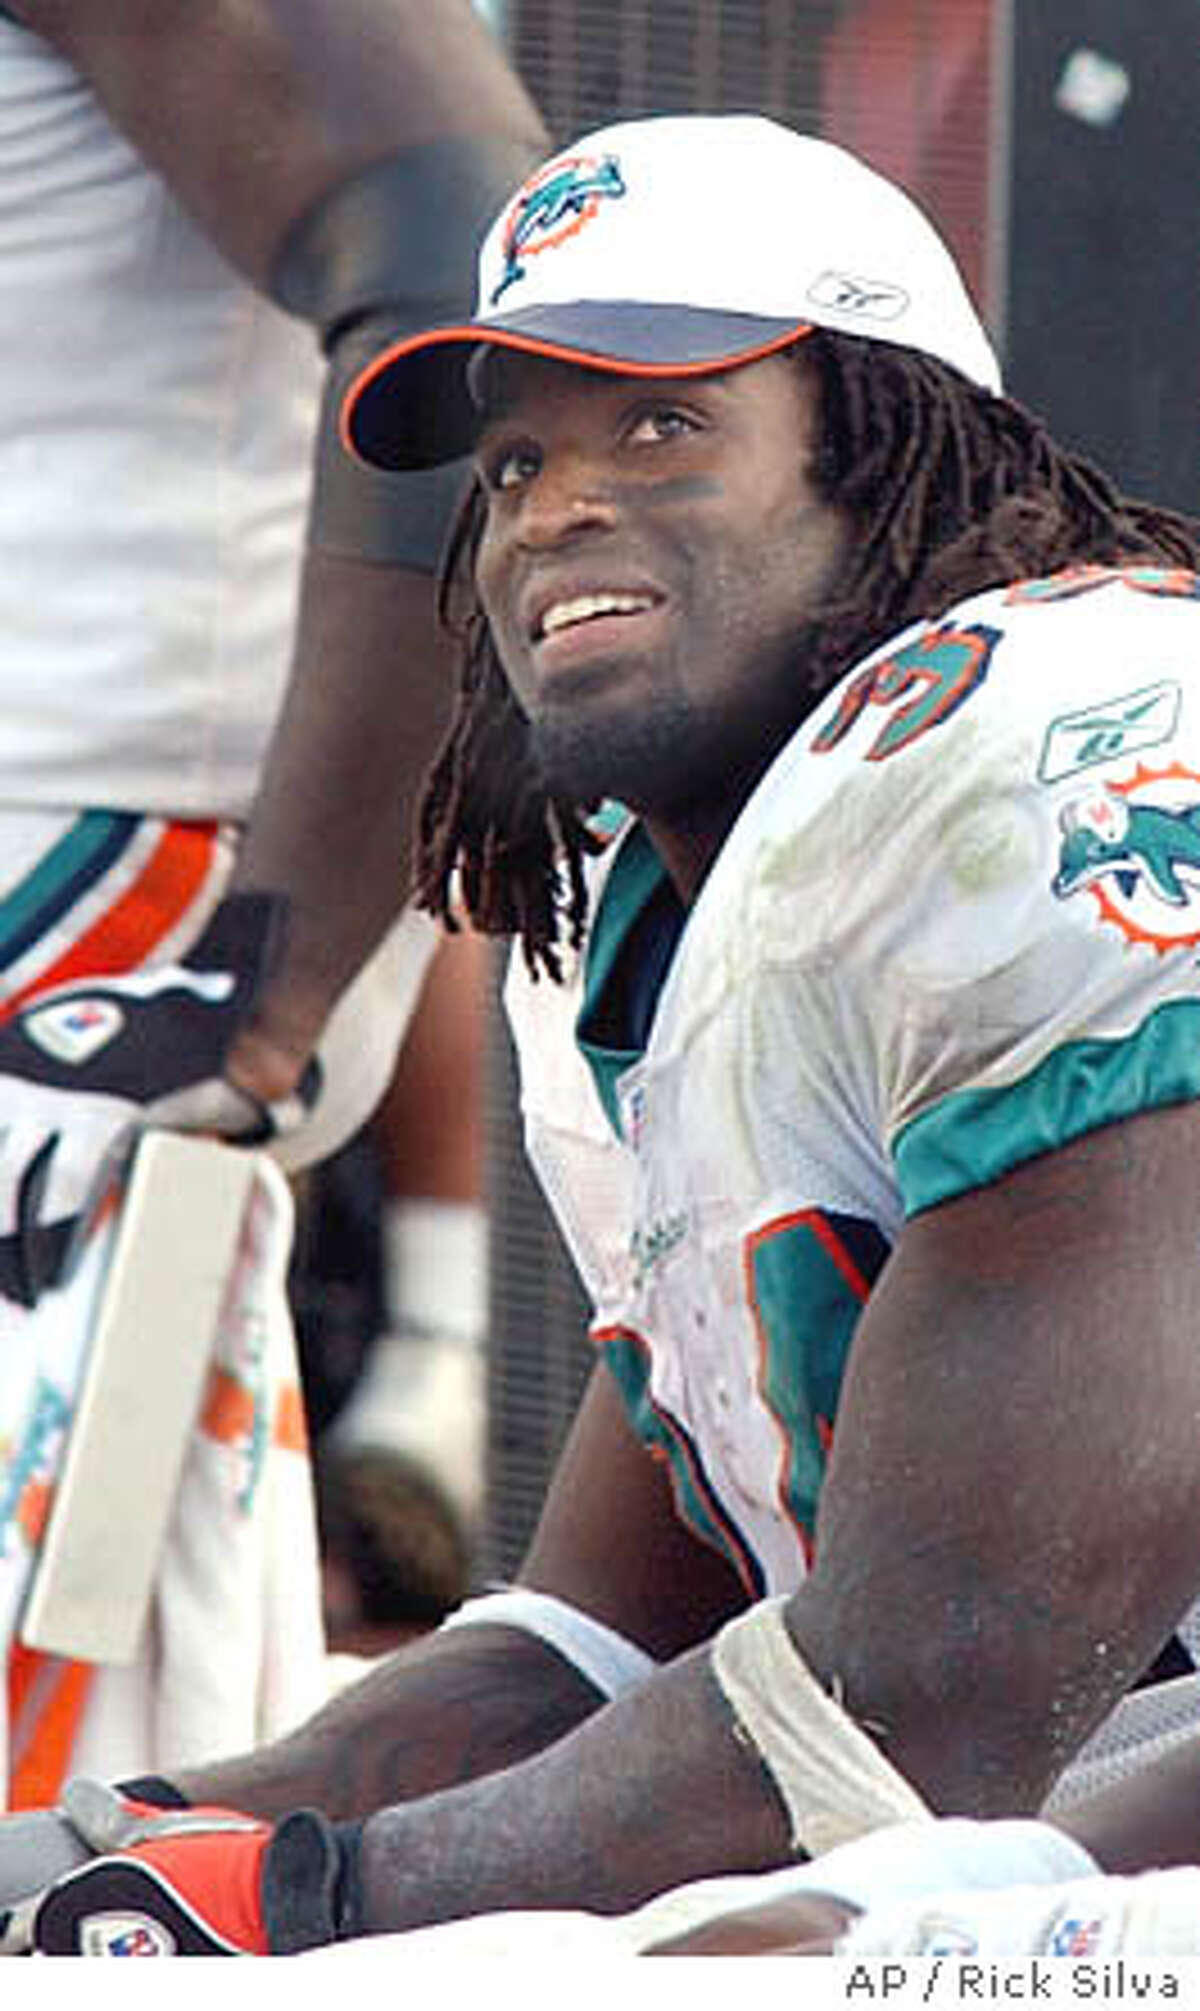 Miami Dolphins' running back Ricky Williams smiles as he looks up at the scoreboard during a game against the San Diego Chargers Sunday, Nov. 24, 2002 in Miami. Williams finished the day with 143 yards on 29 carries giving him over 1000 yards for the season. This was the sixth game of the year where Williams has gained over 100 yards. (AP Photo/Rick Silva)